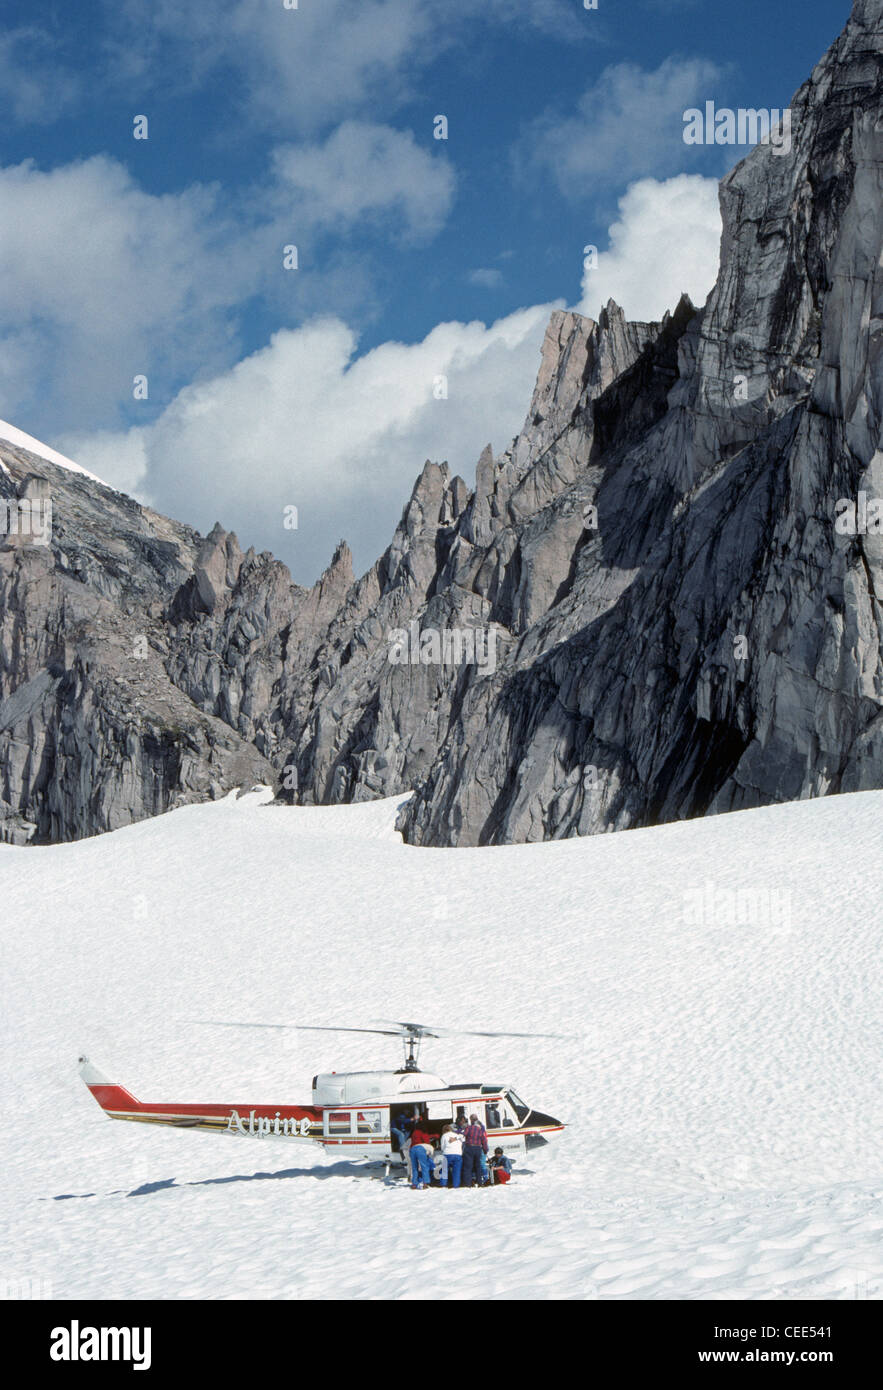 Hikers disembark from a helicopter on a snow-covered glacier in the Bugaboo range to explore the Purcell Mountains in British Columbia, Canada. Stock Photo